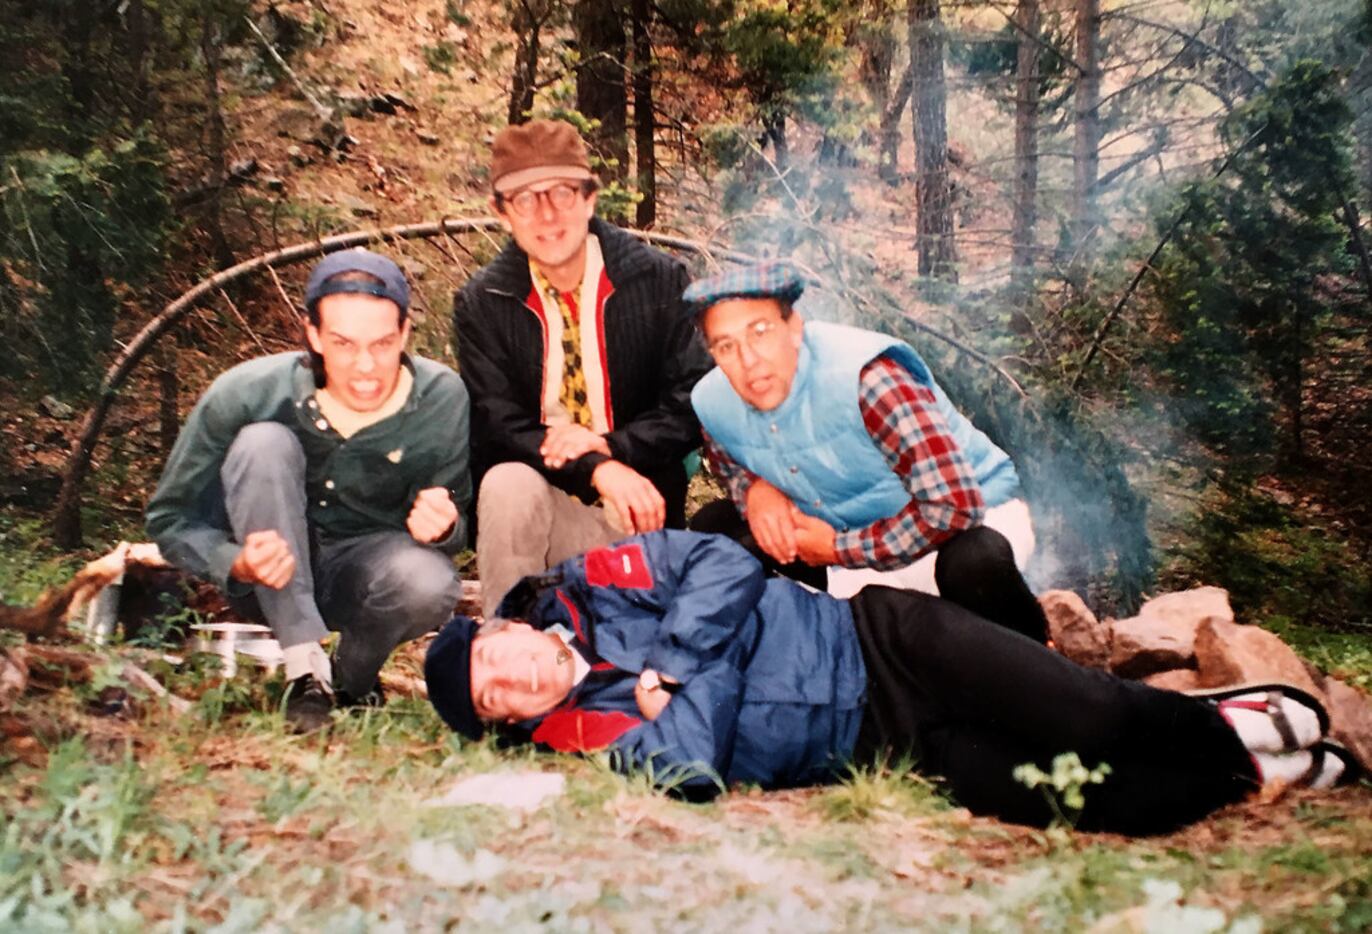 Beto, left, in undated photo while on camping trip, probably in Gila Wilderness in New...